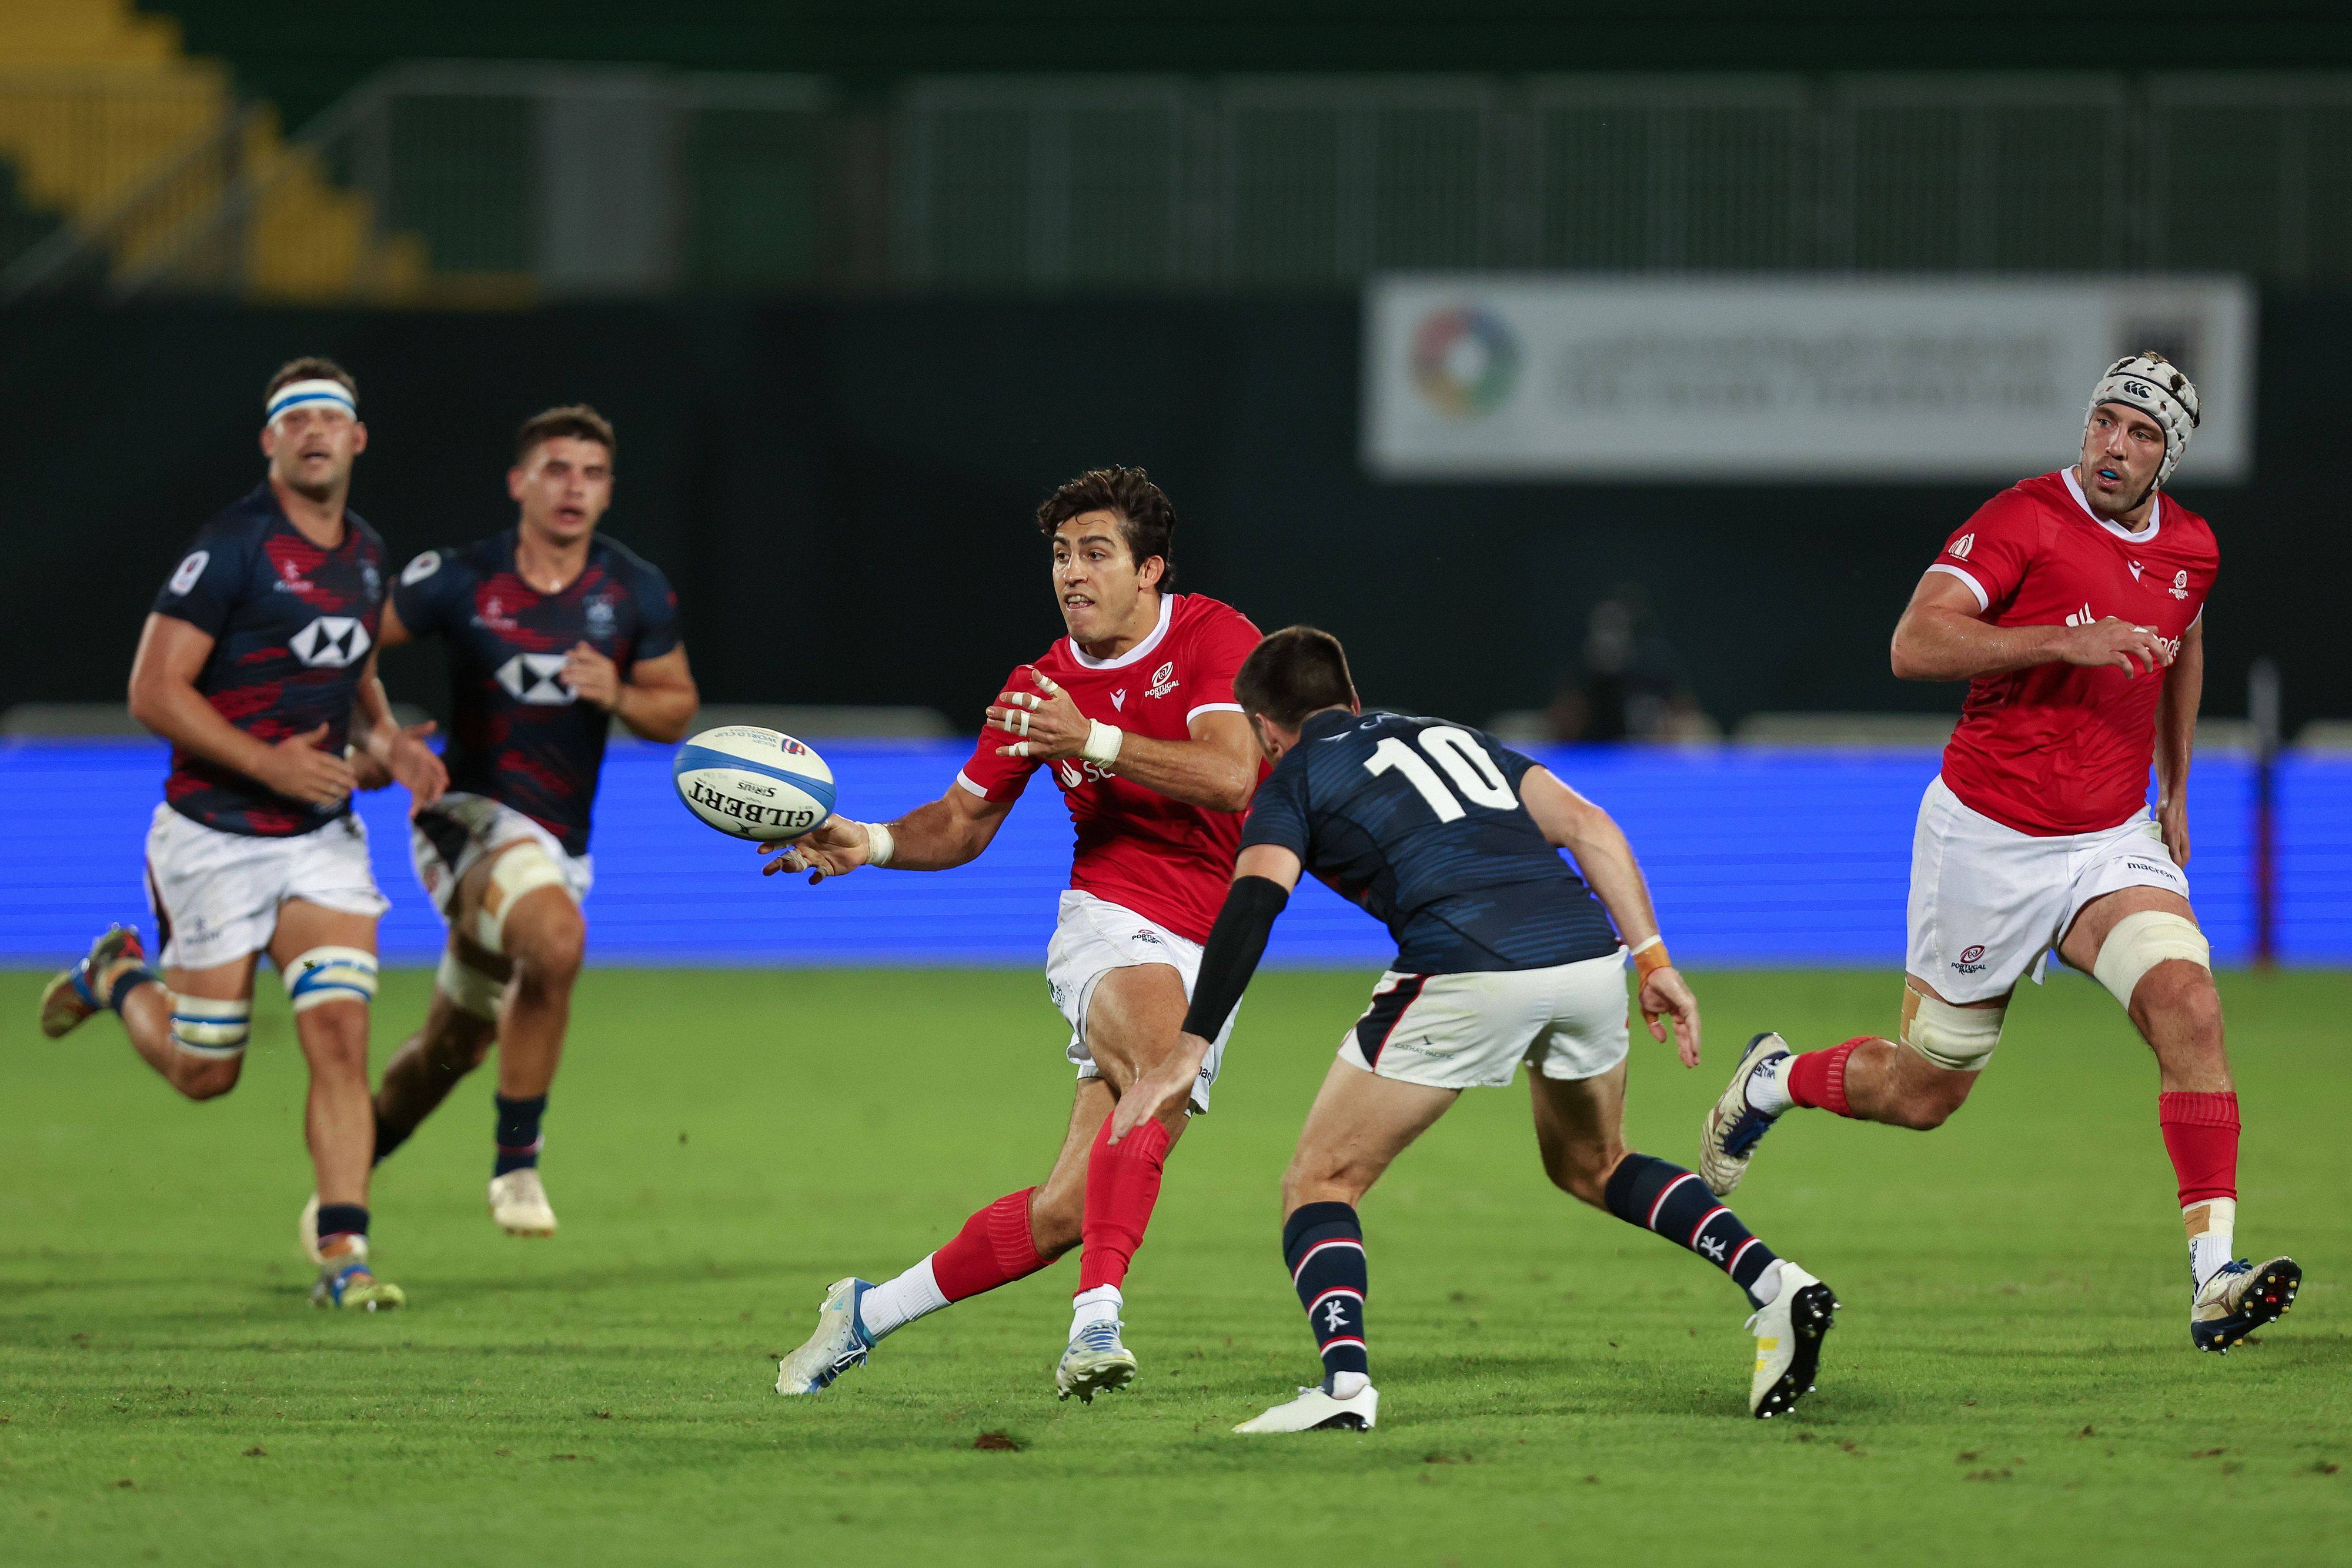 Tomas Appleton of Portugal offloads the ball while under pressure from Hong Kong’s Gregor McNeish at The Sevens Stadium in Dubai. Photo: World Rugby
